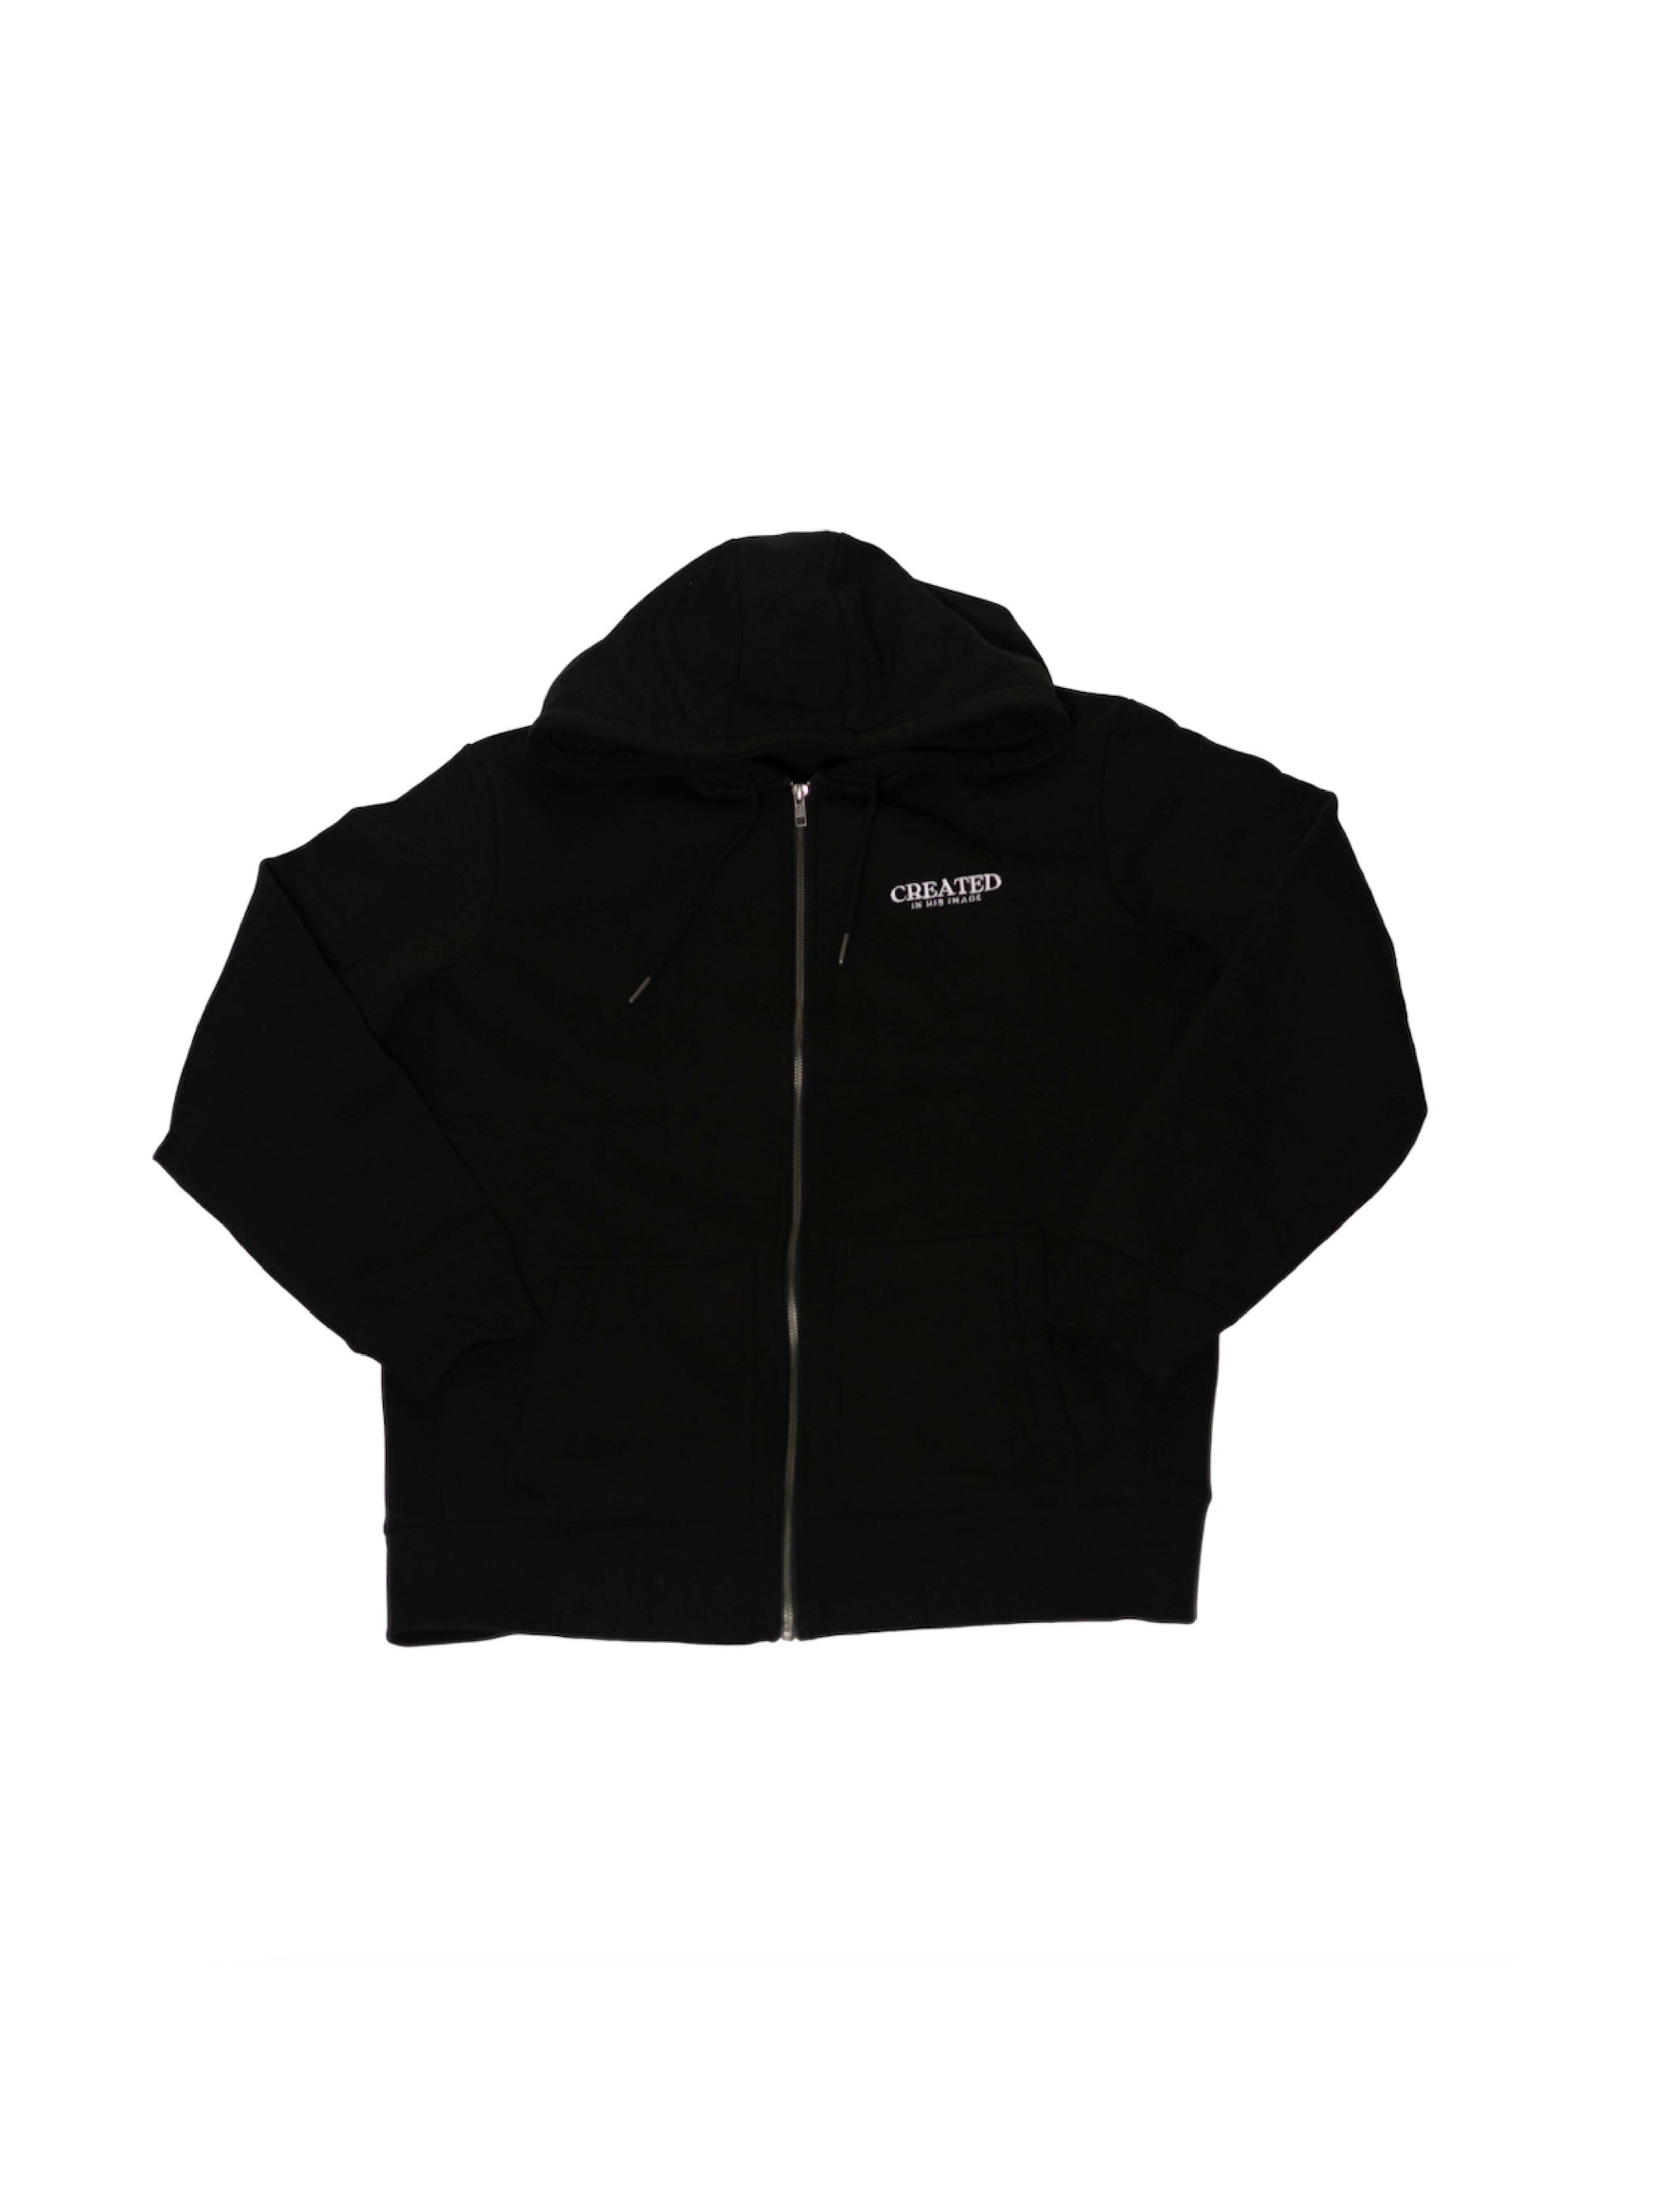 Created in His Image - Midnight zip up hoodie